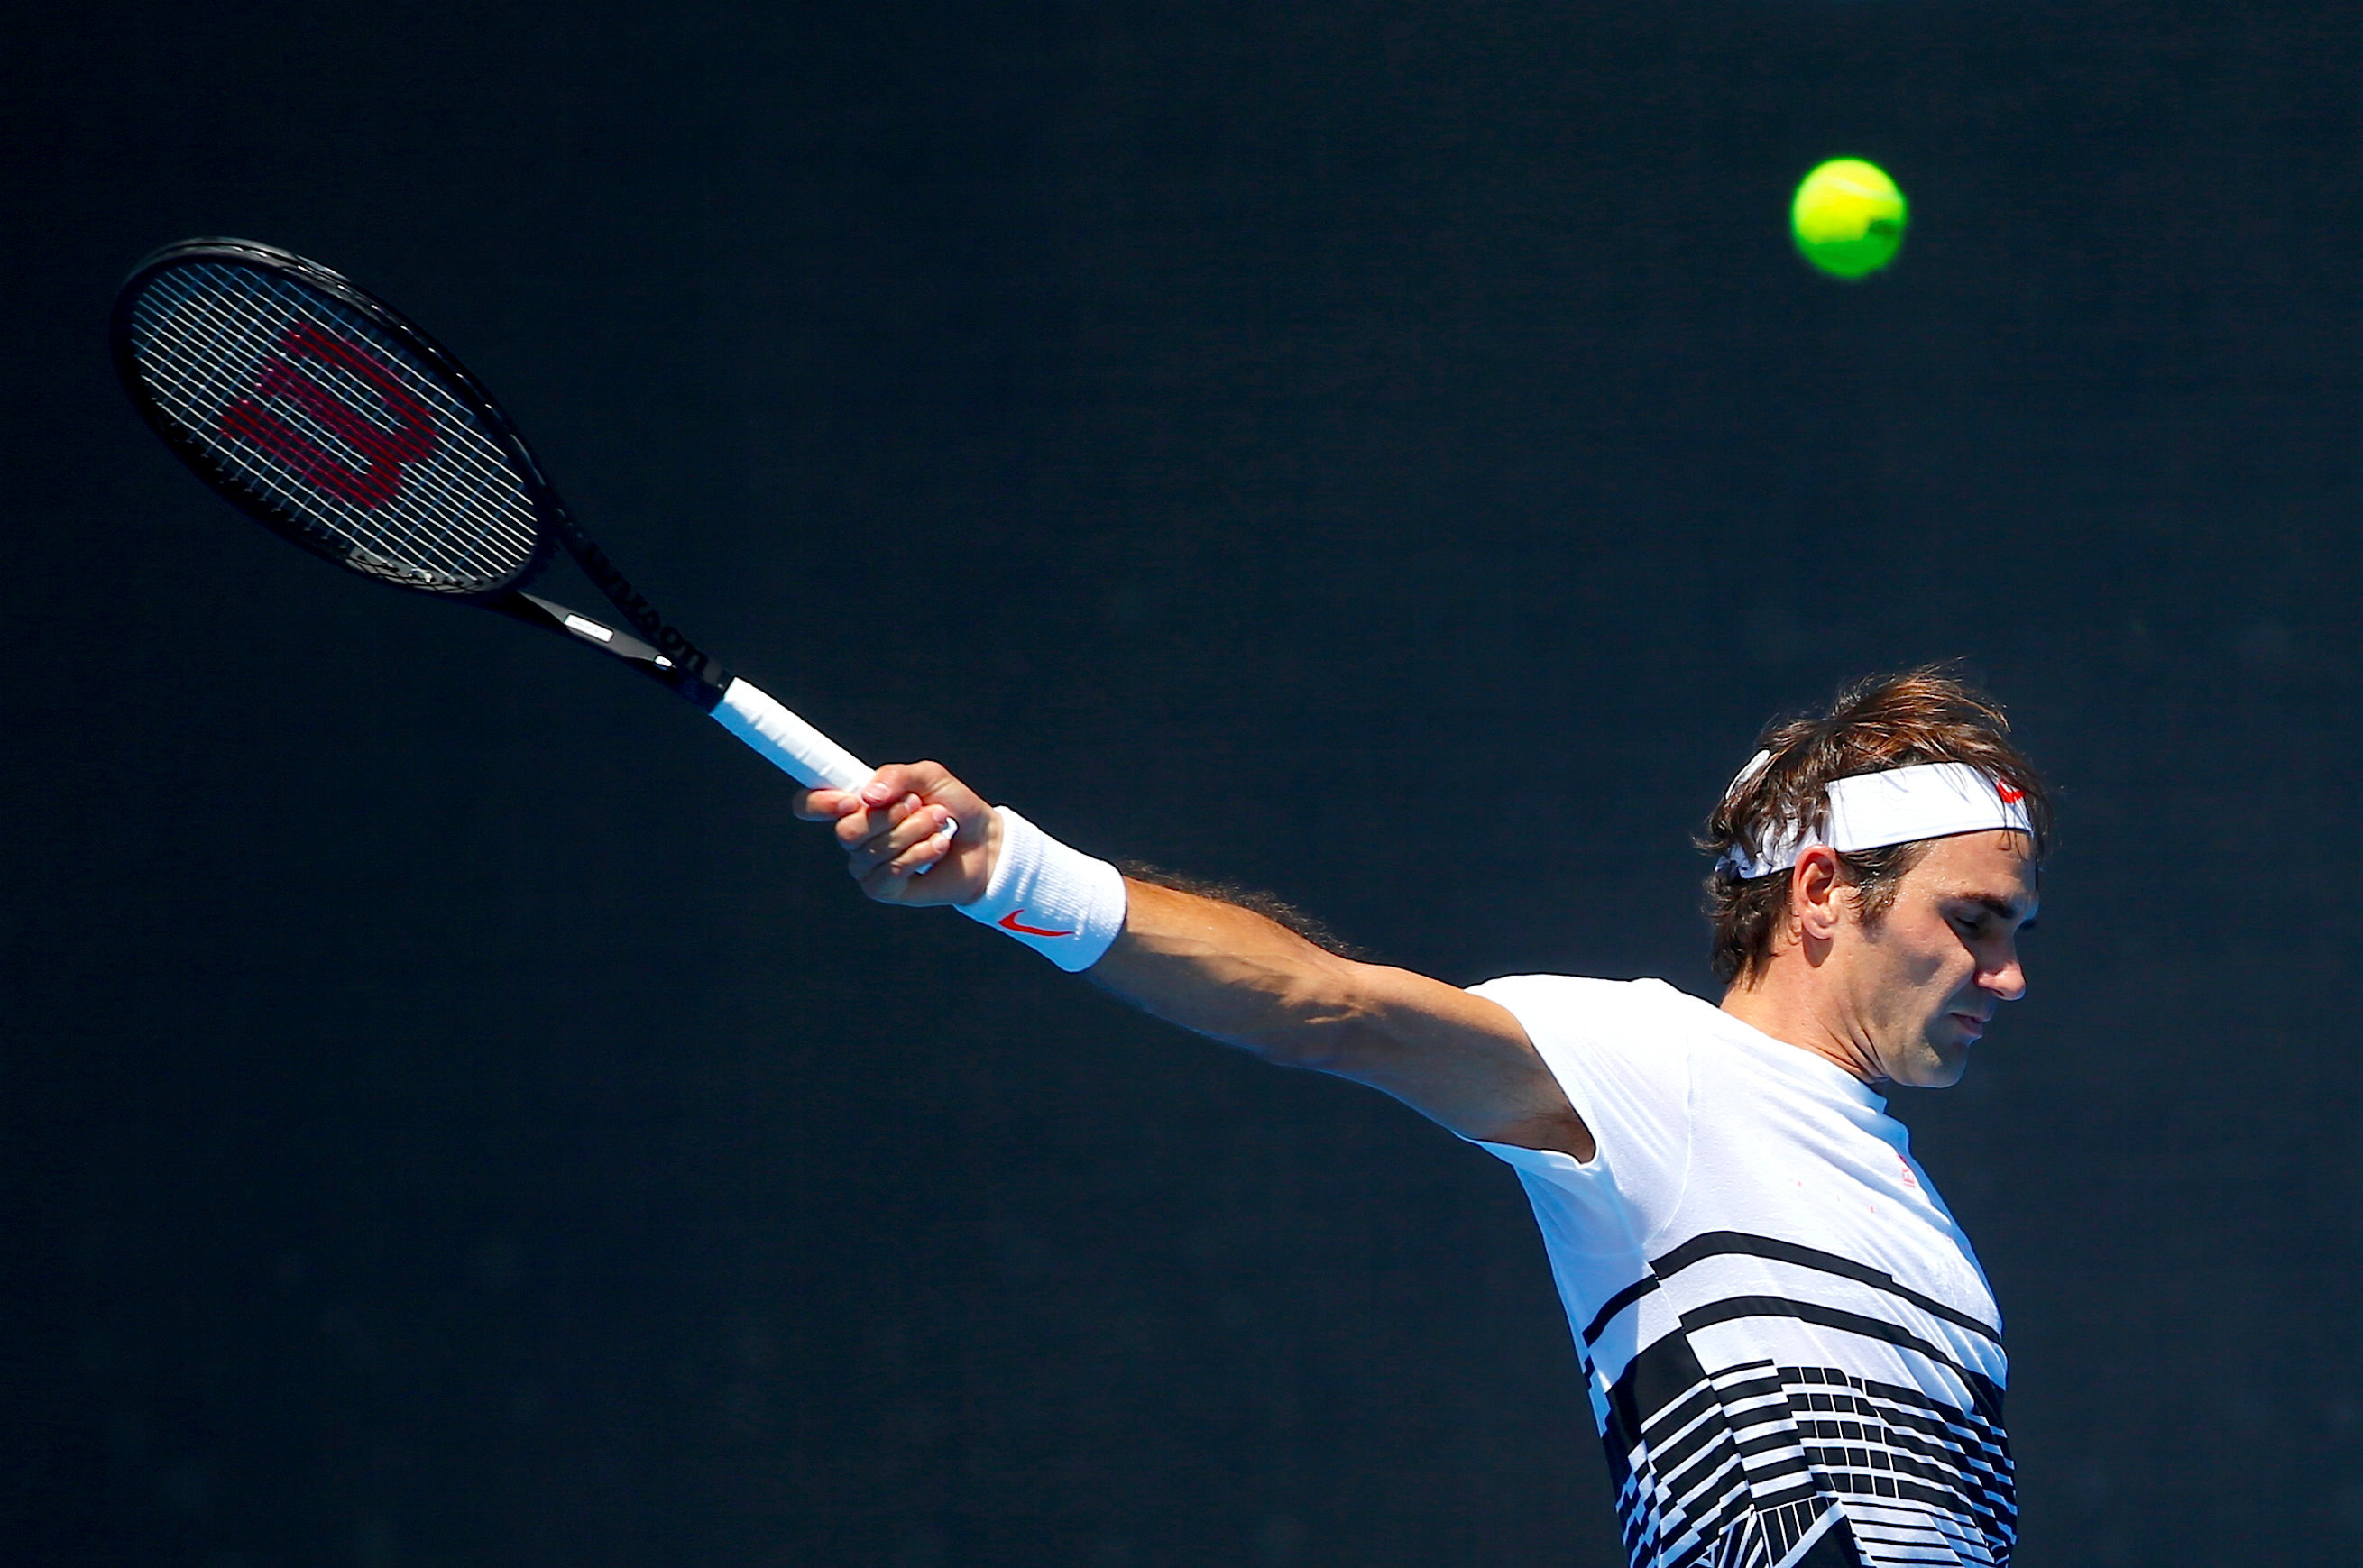 Switzerland's Roger Federer hits a shot during a training session ahead of the Australian Open tennis tournament in Melbourne, Australia, January 12, 2017. REUTERS/David Gray